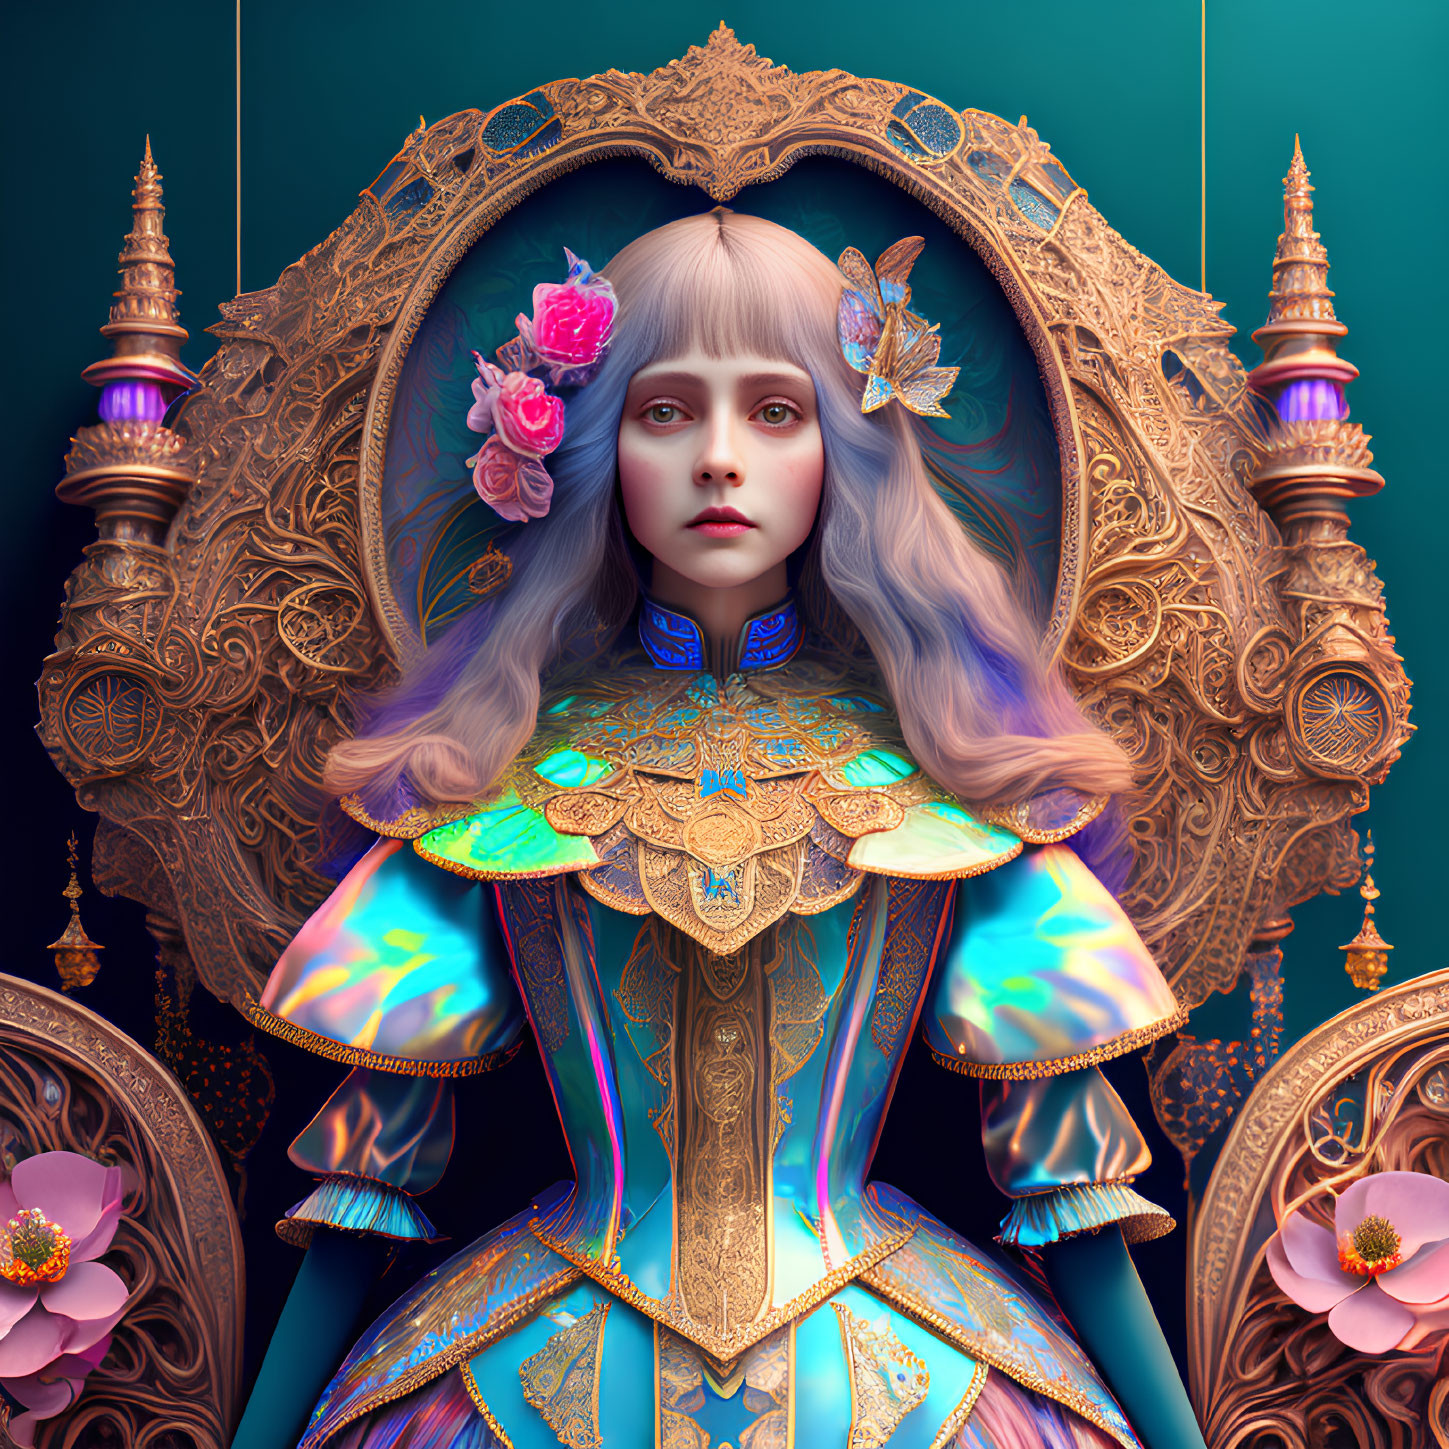 Surreal portrait of woman with pale skin, golden headdress, blue and gold garment